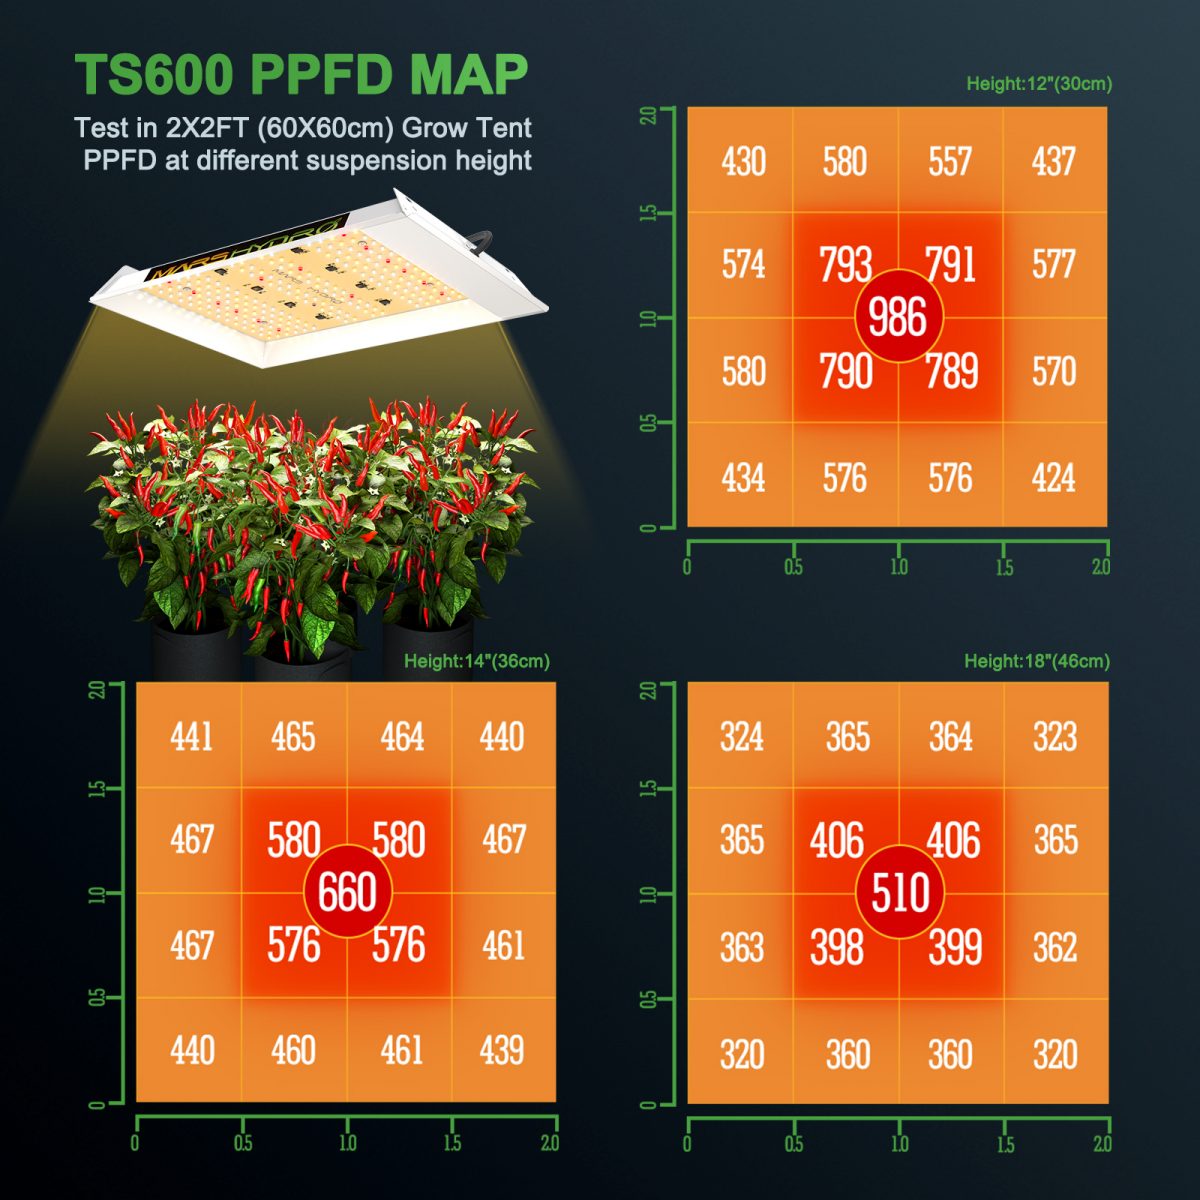 A special full spectrum combination of PAR ranges that emits the most light in the 400-700nm waveband, making it extremely conducive to plant photosynthesis. Appropriate IR (730-740nm) is also included in the range to aid in the formation of bigger leaves and larger buds.